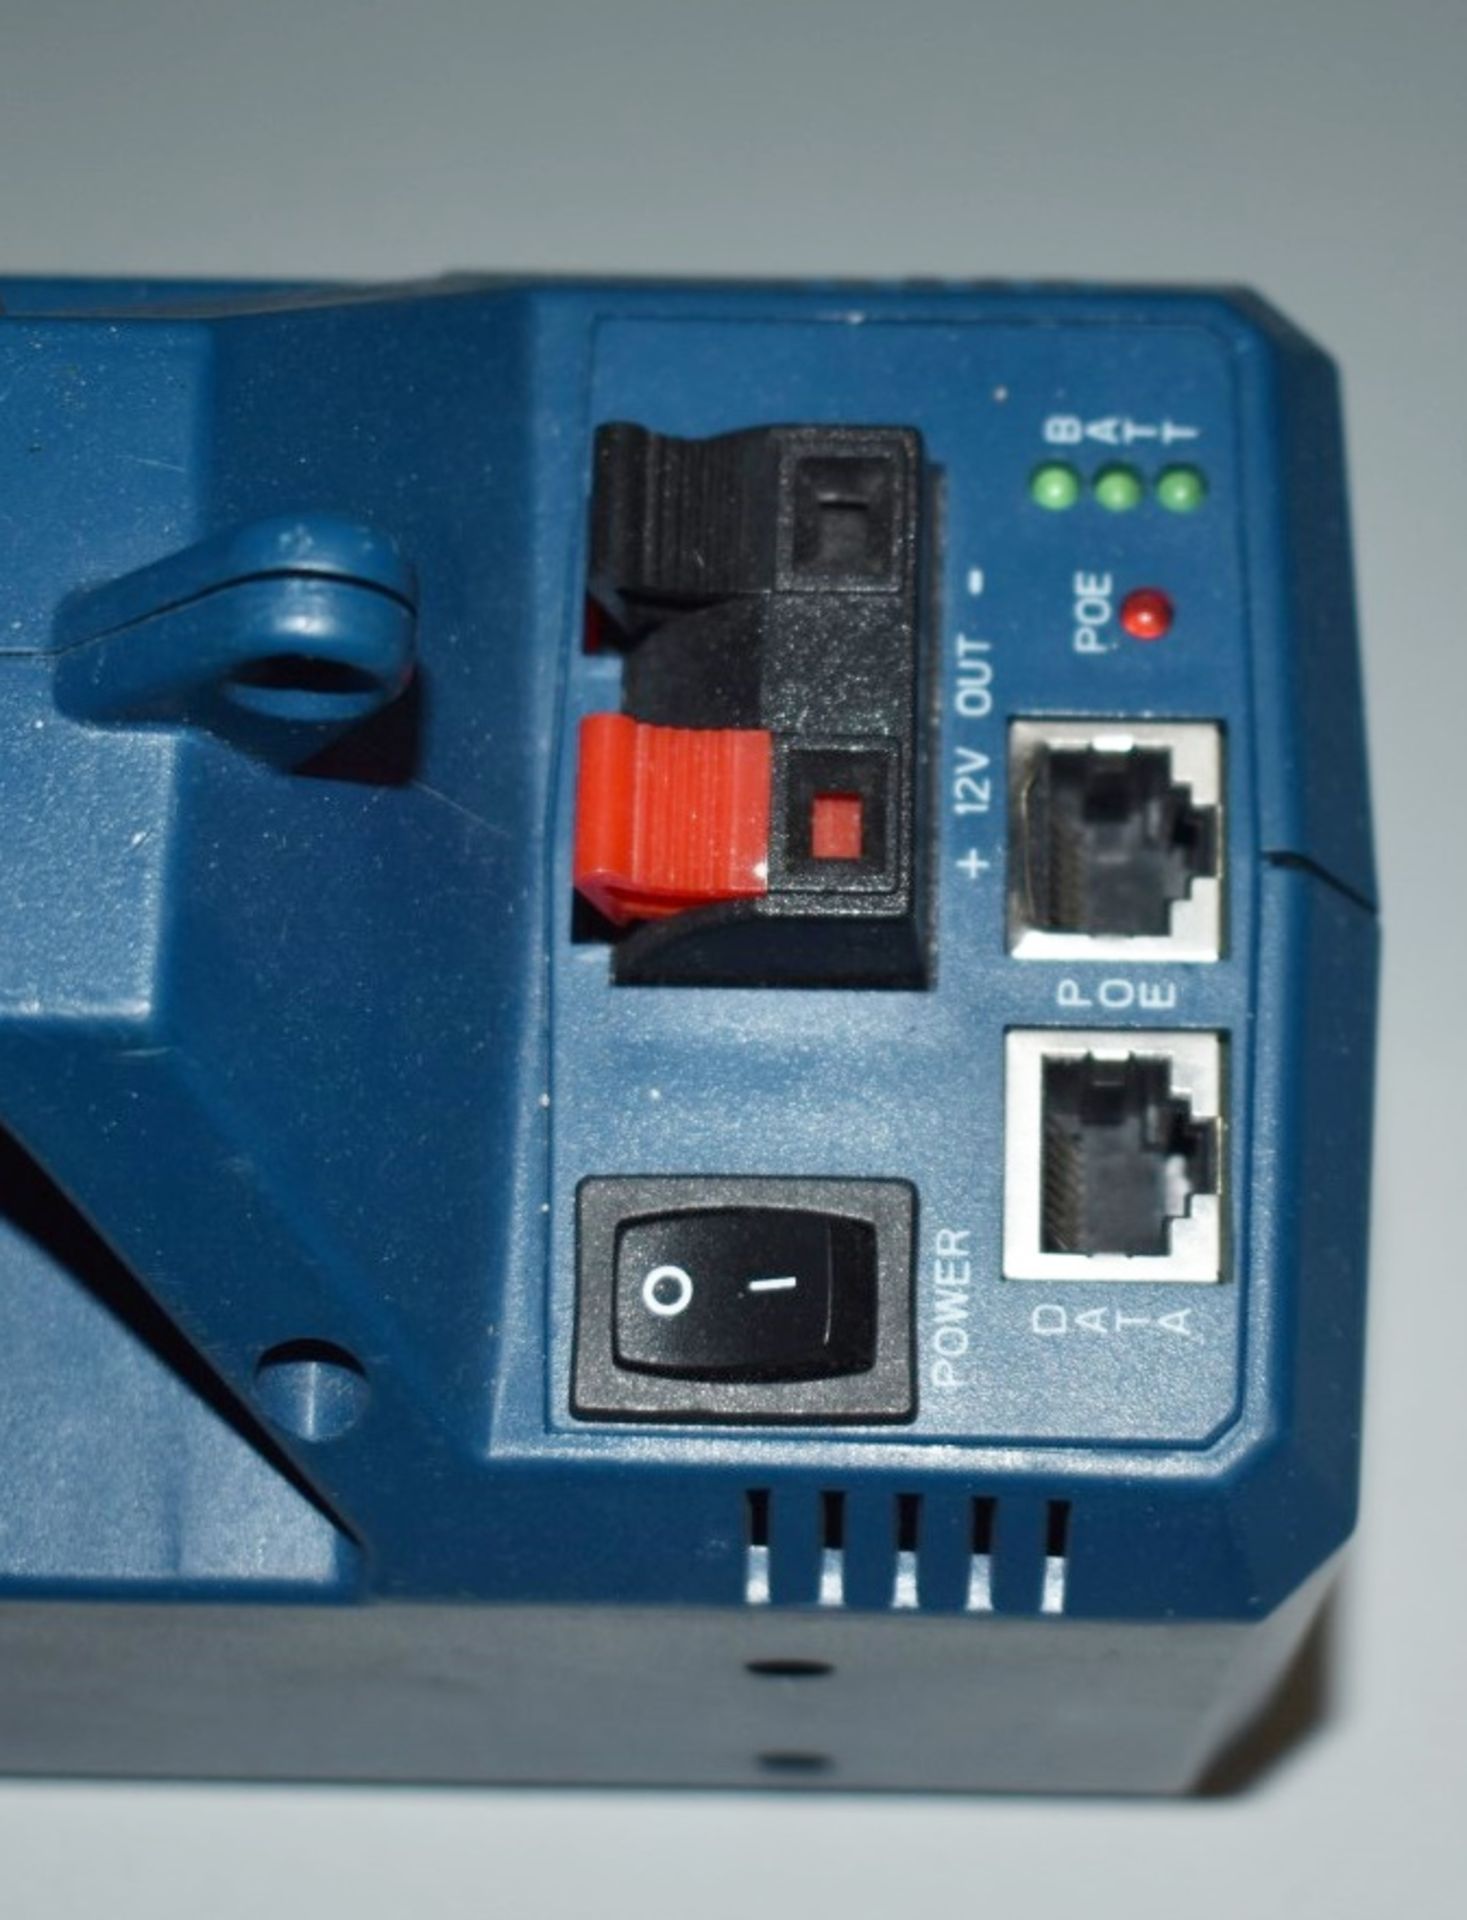 1 x Veracity Point Source Portable POE Injector & Network Adaptor Power Over Ethernet Injector - Image 2 of 3